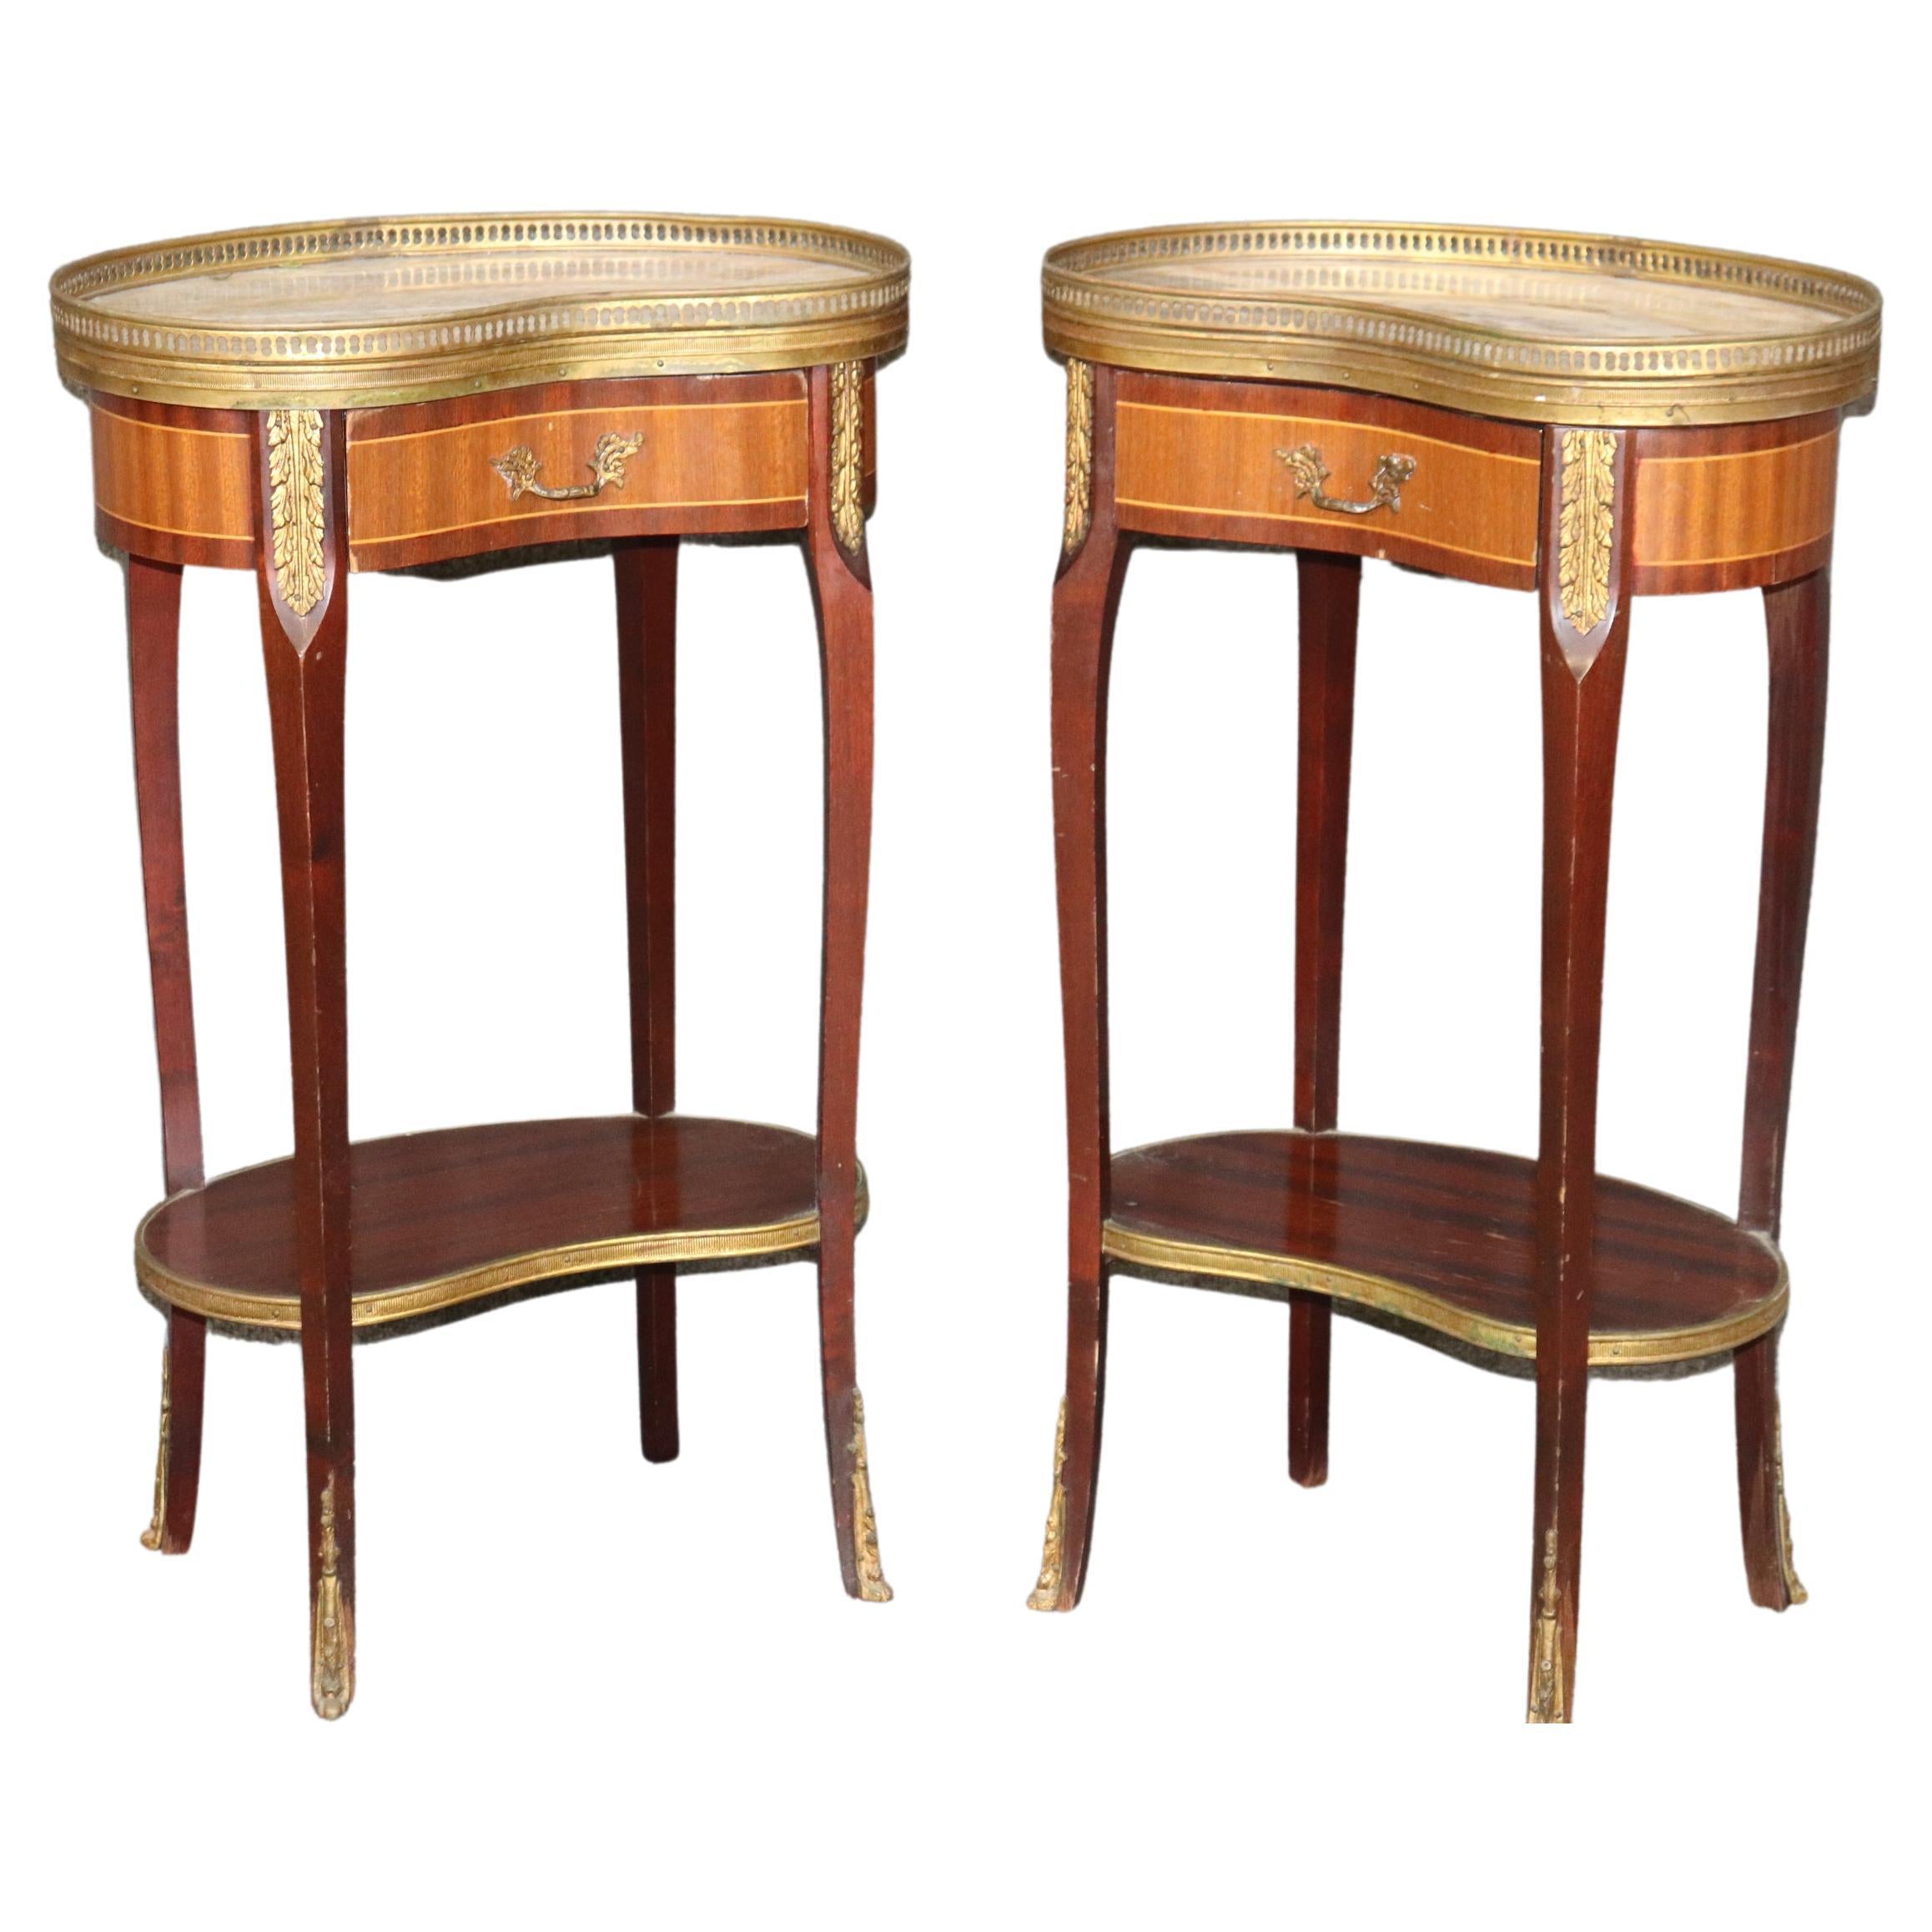 Pair of Marble Top Satinwood French Louis XV Kidney Shape Nightstands circa 1940 For Sale